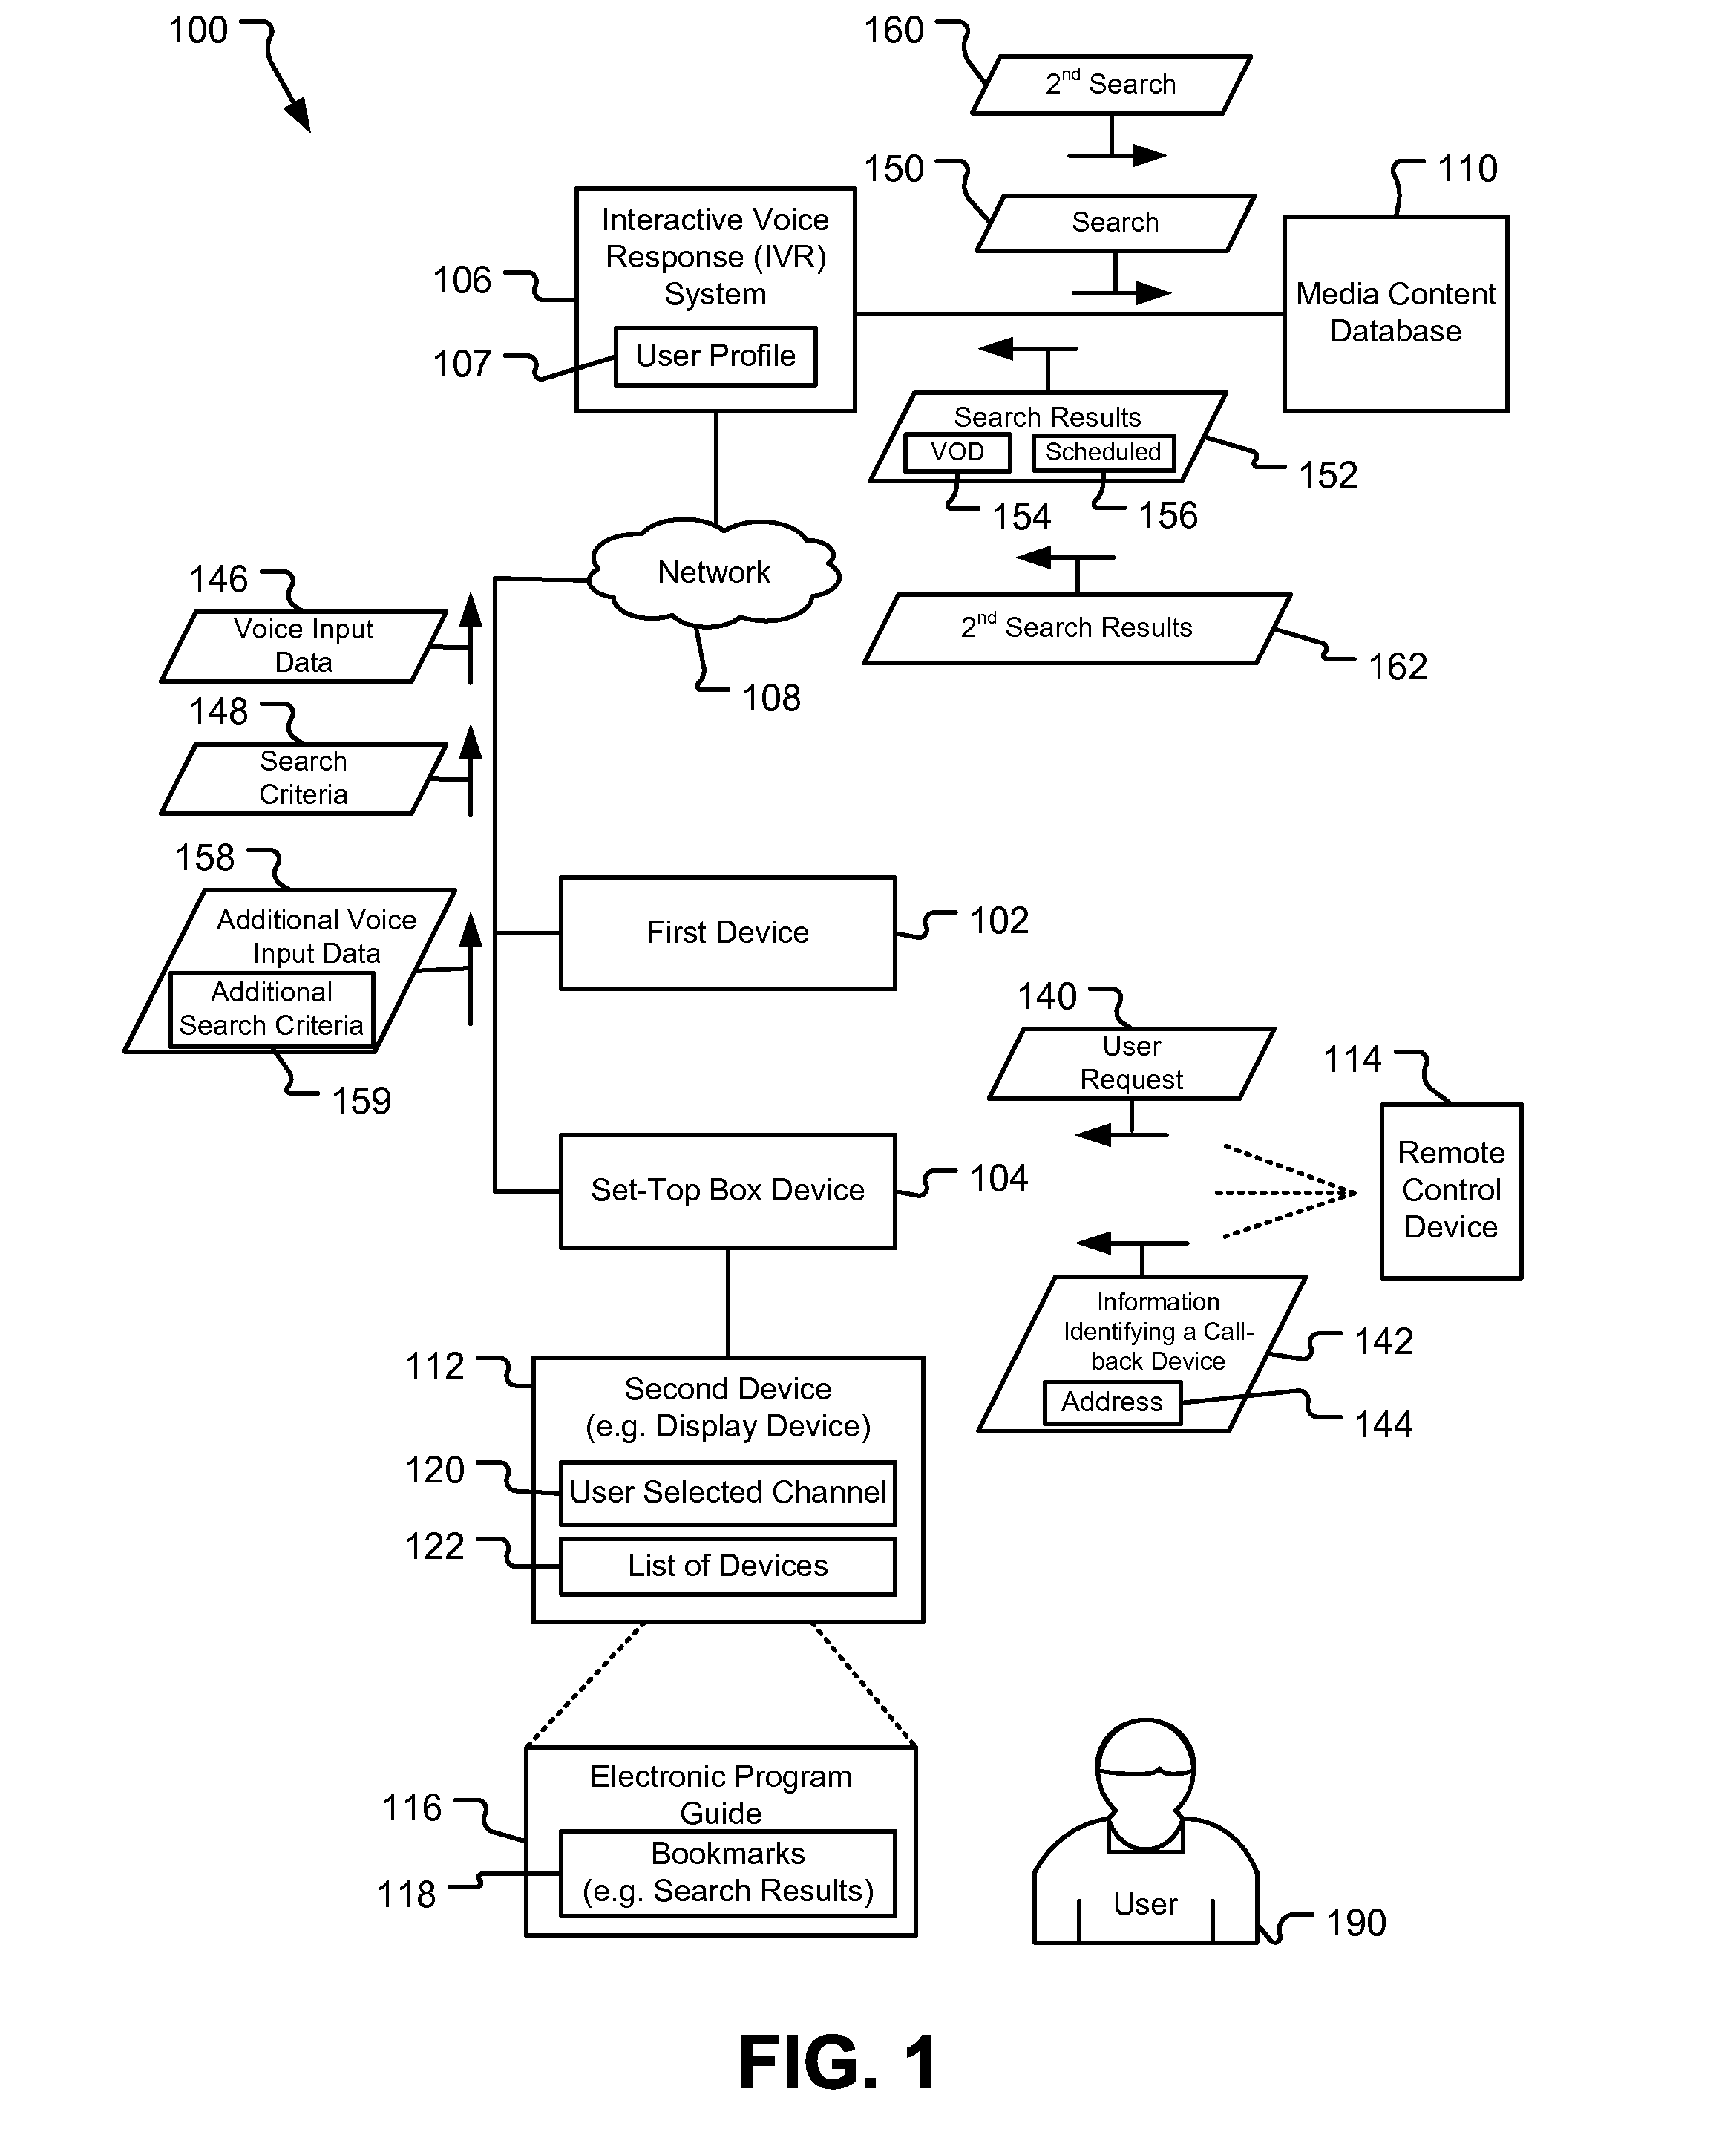 System and Method to Search a Media Content Database Based on Voice Input Data